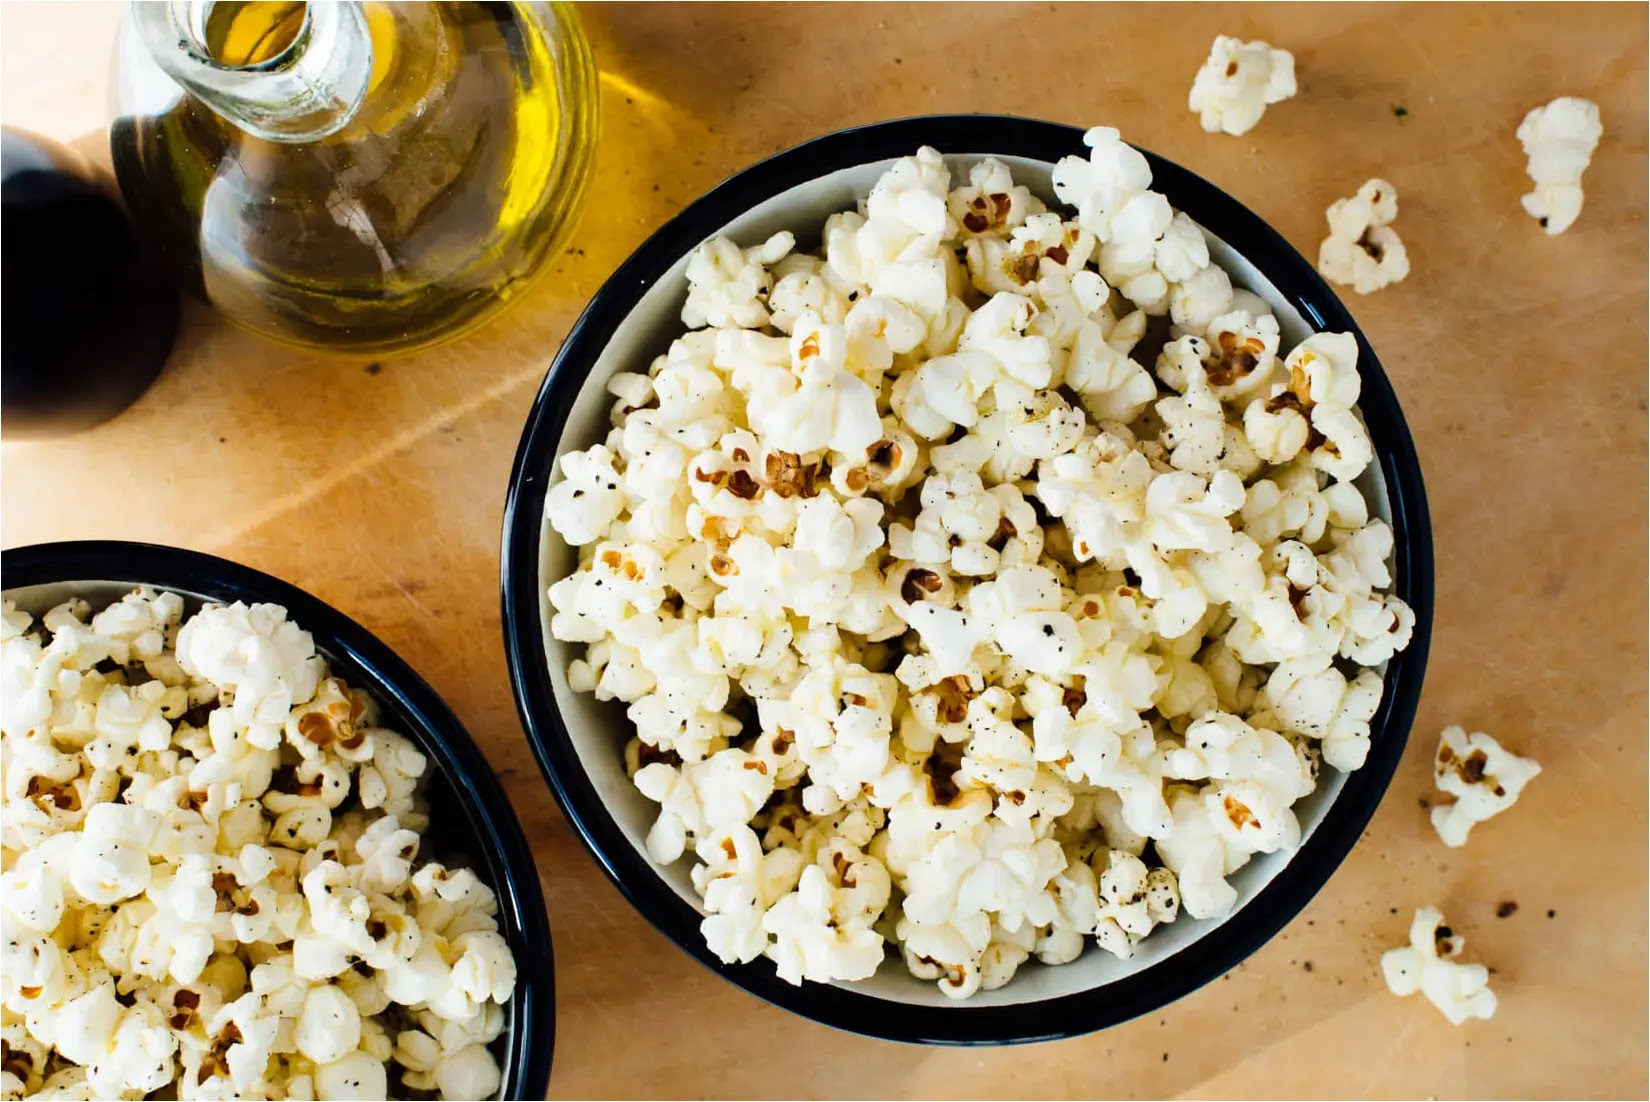 How To Make Popcorn In Electric Skillet